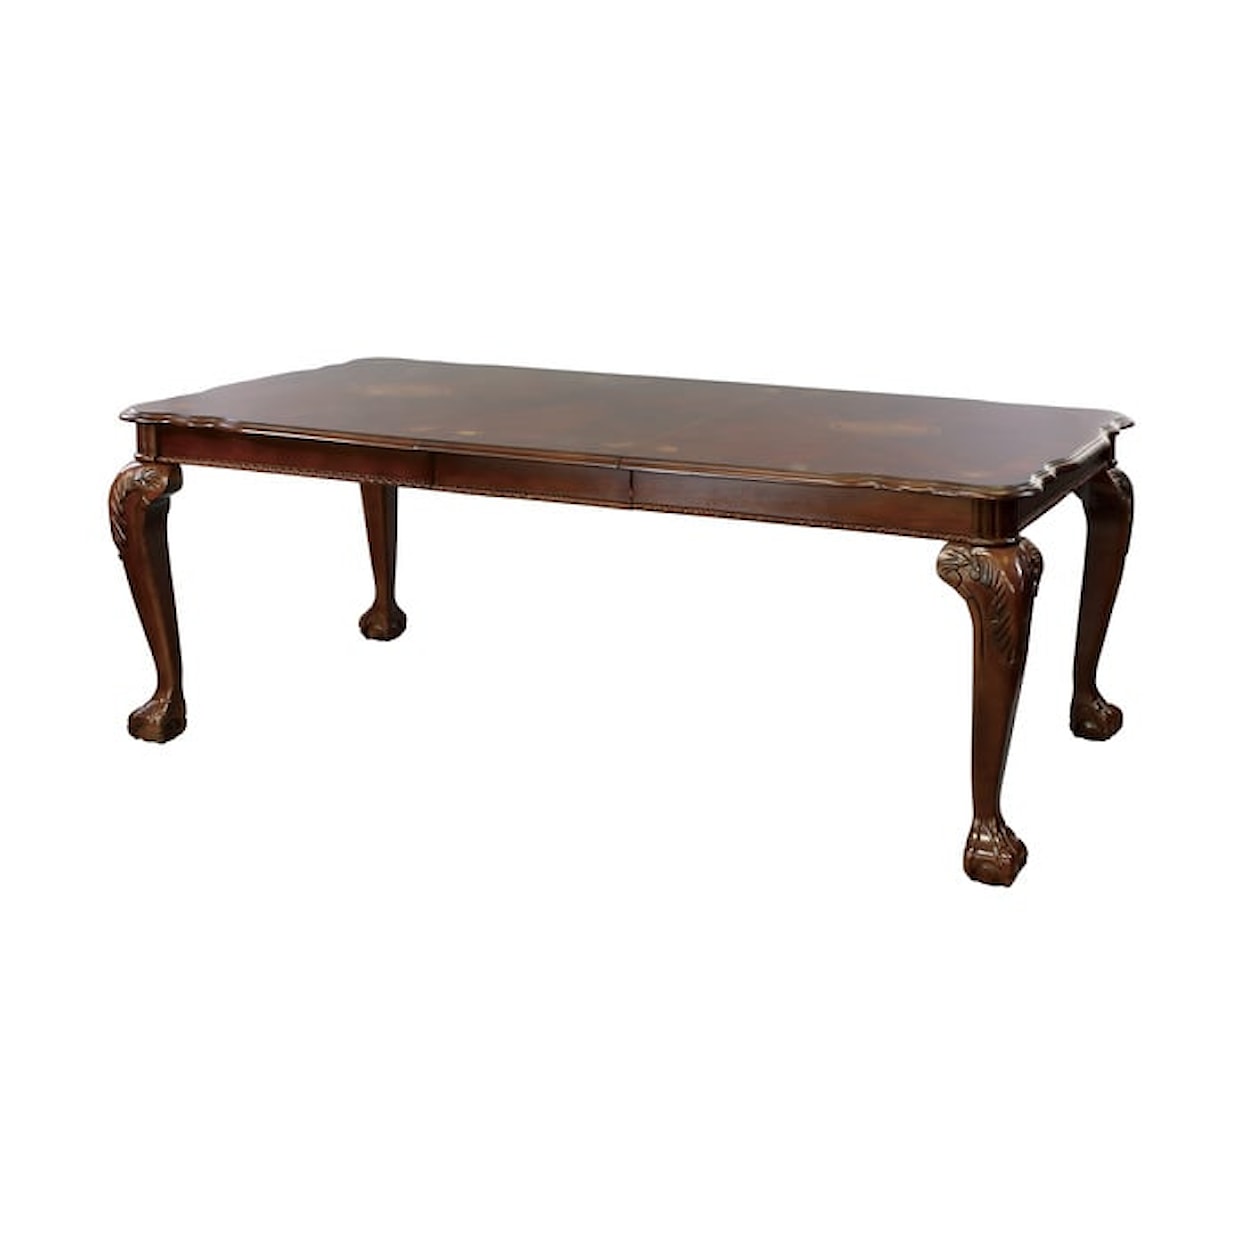 Homelegance Norwich Dining Table